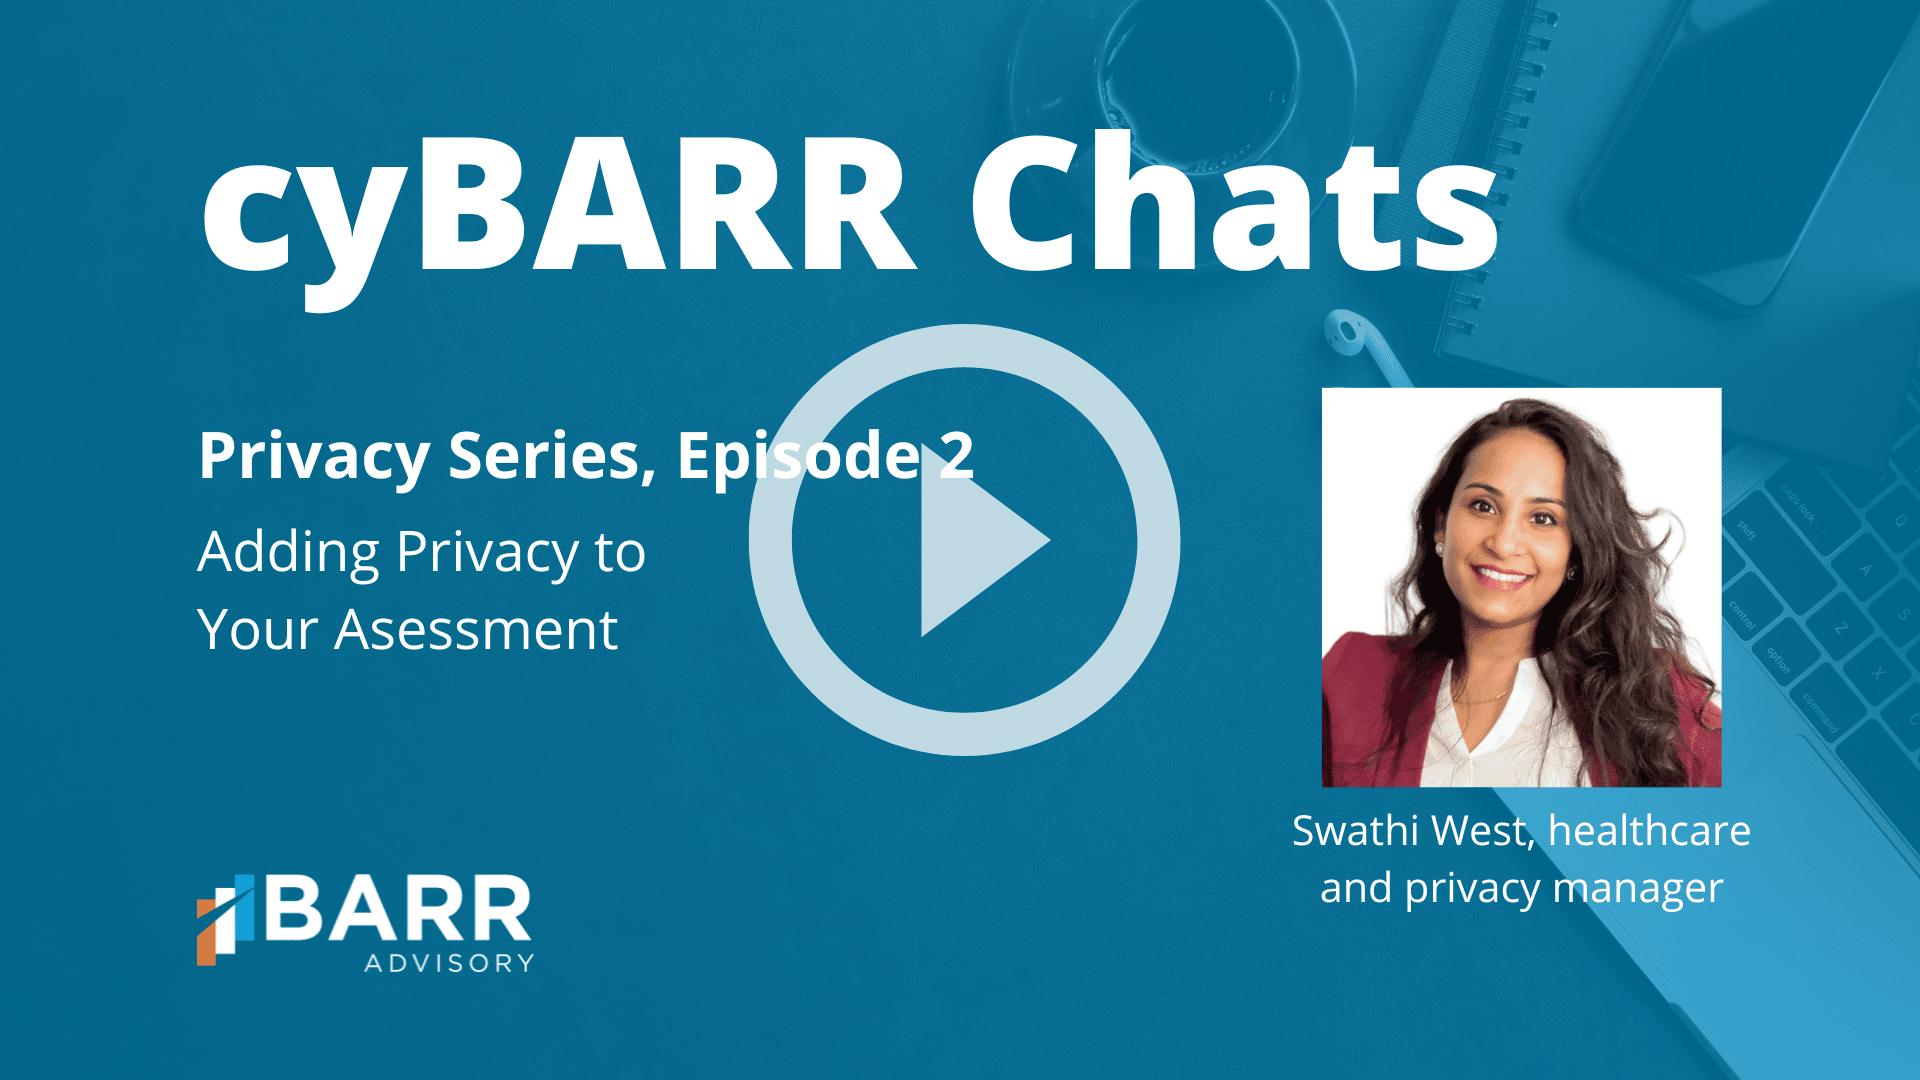 cyBARR Chats Privacy Series Episode 2: Adding Privacy to Your Assessment